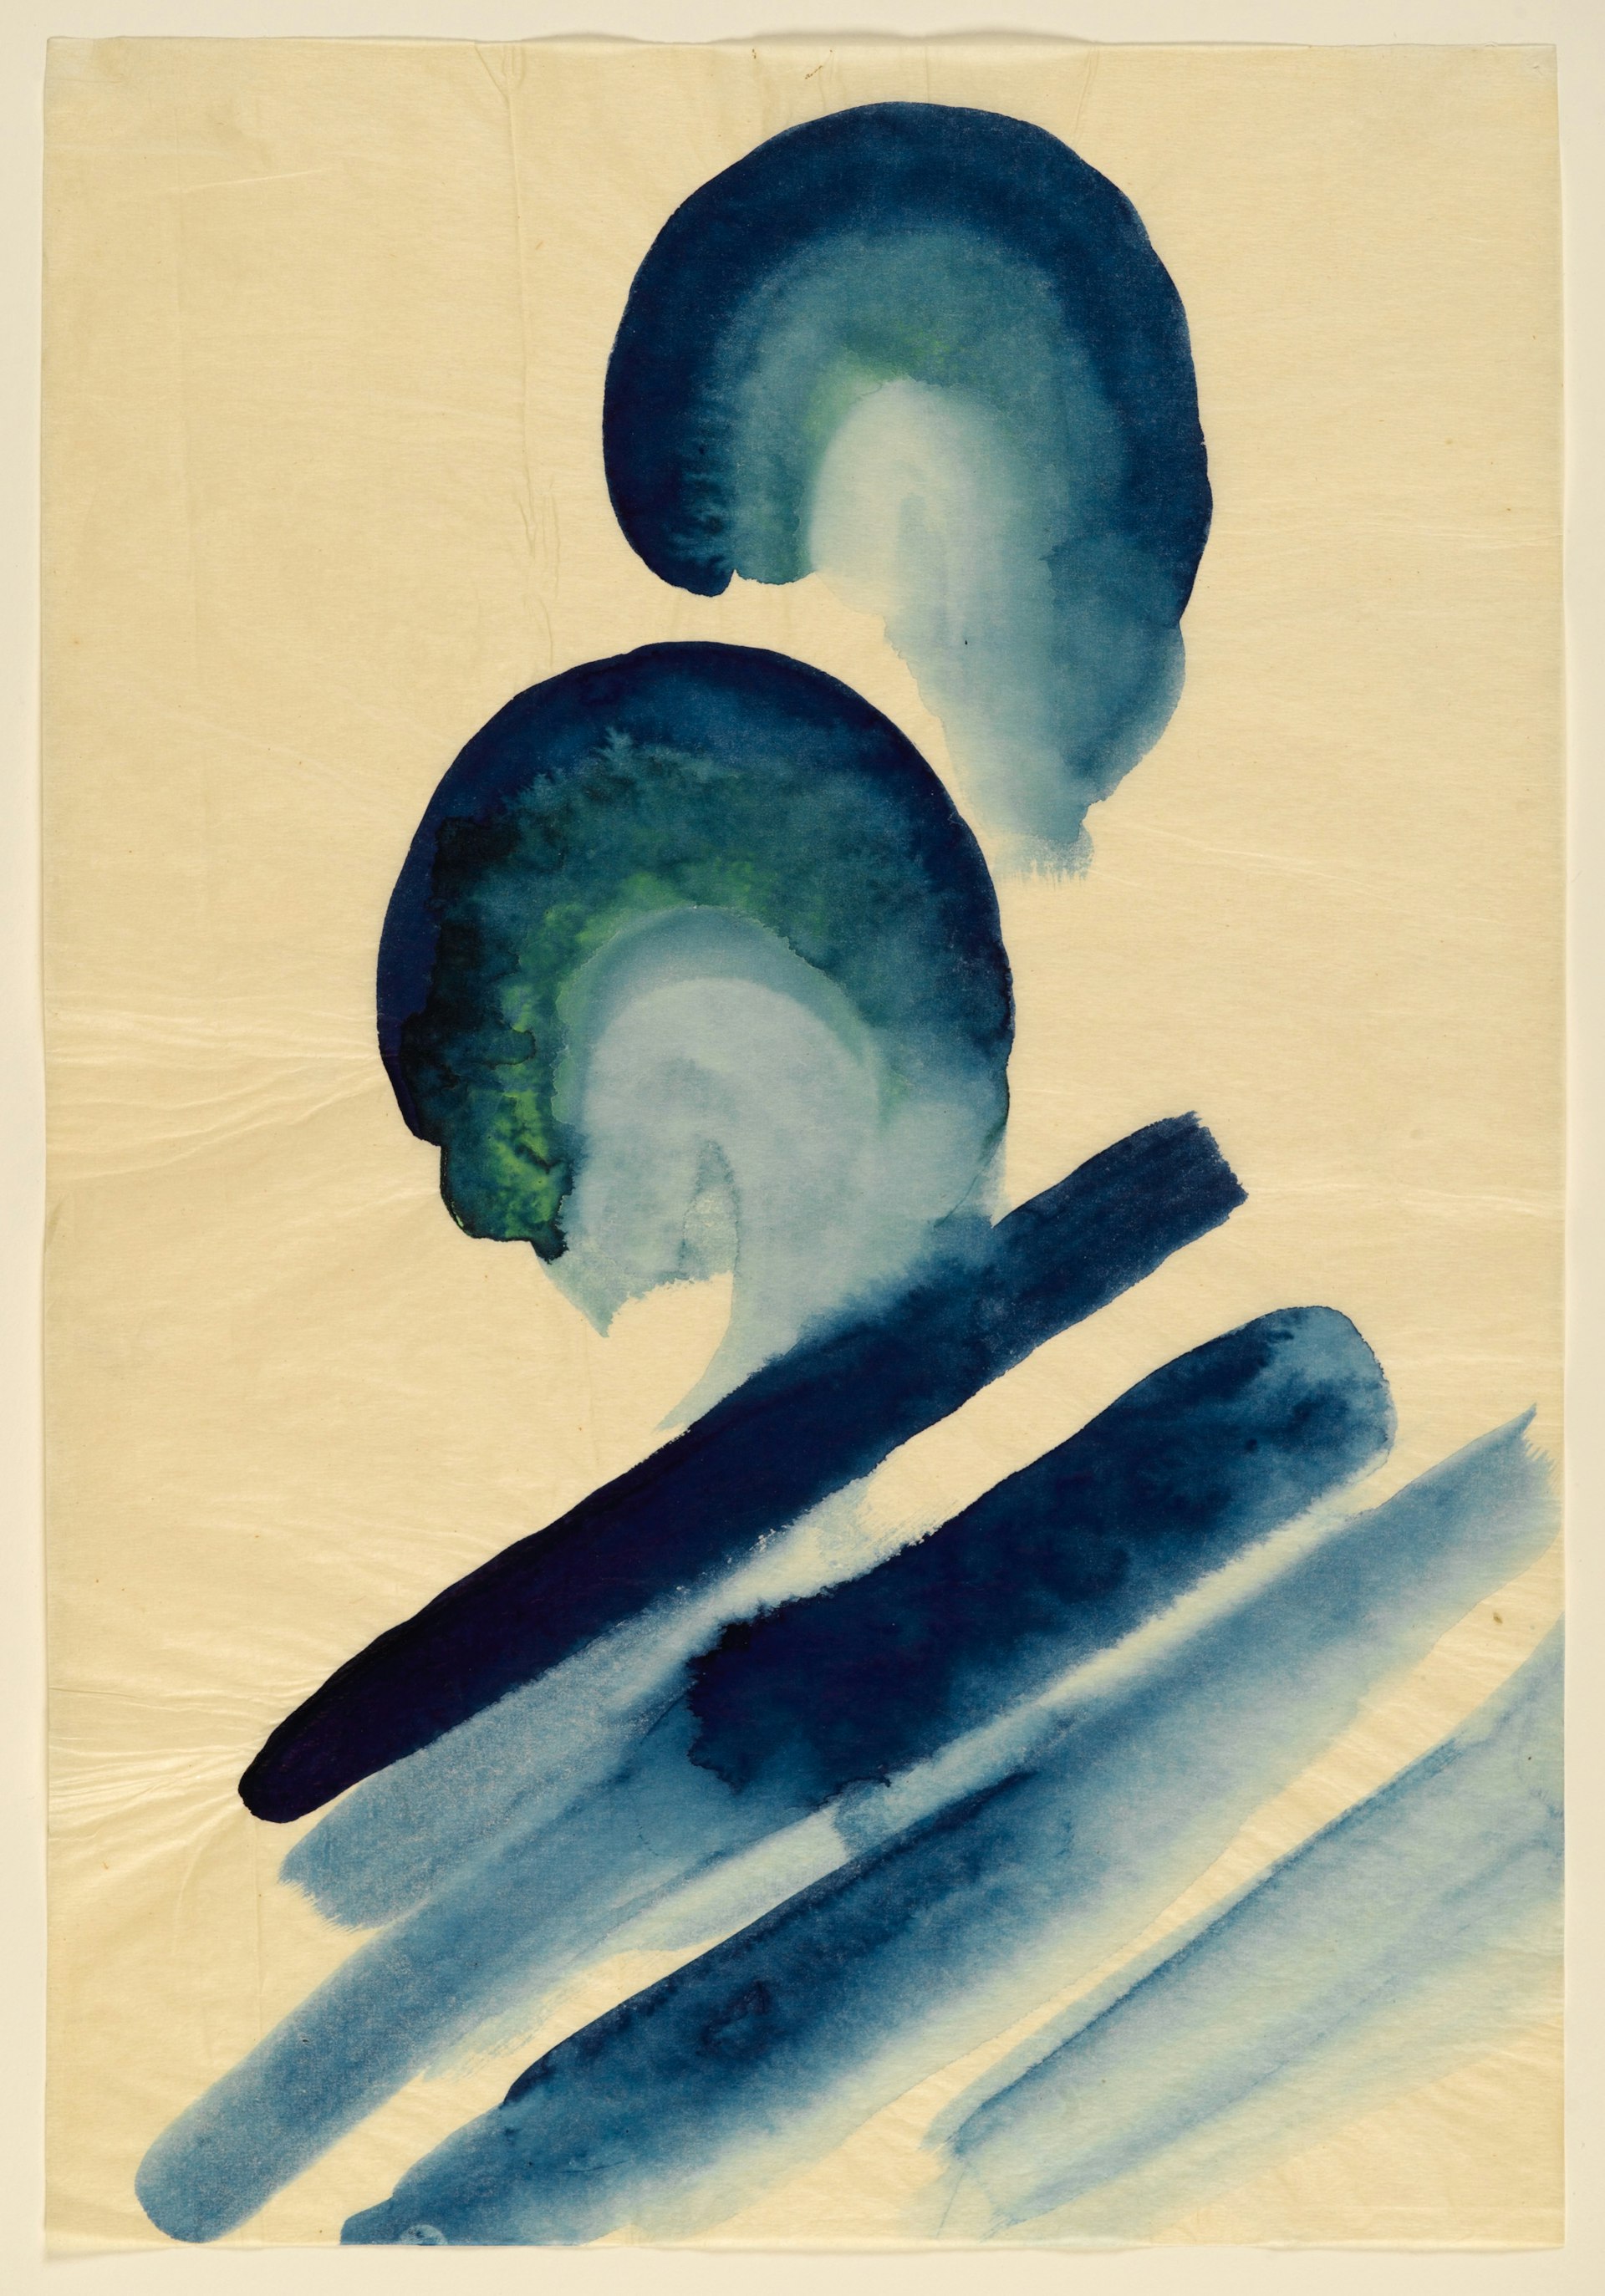 Blue #2, 1916. Brooklyn Museum; Bequest of Mary T. Cockcroft, by exchange, 58.74. (Photo: Sarah DeSantis, Brooklyn Museum)